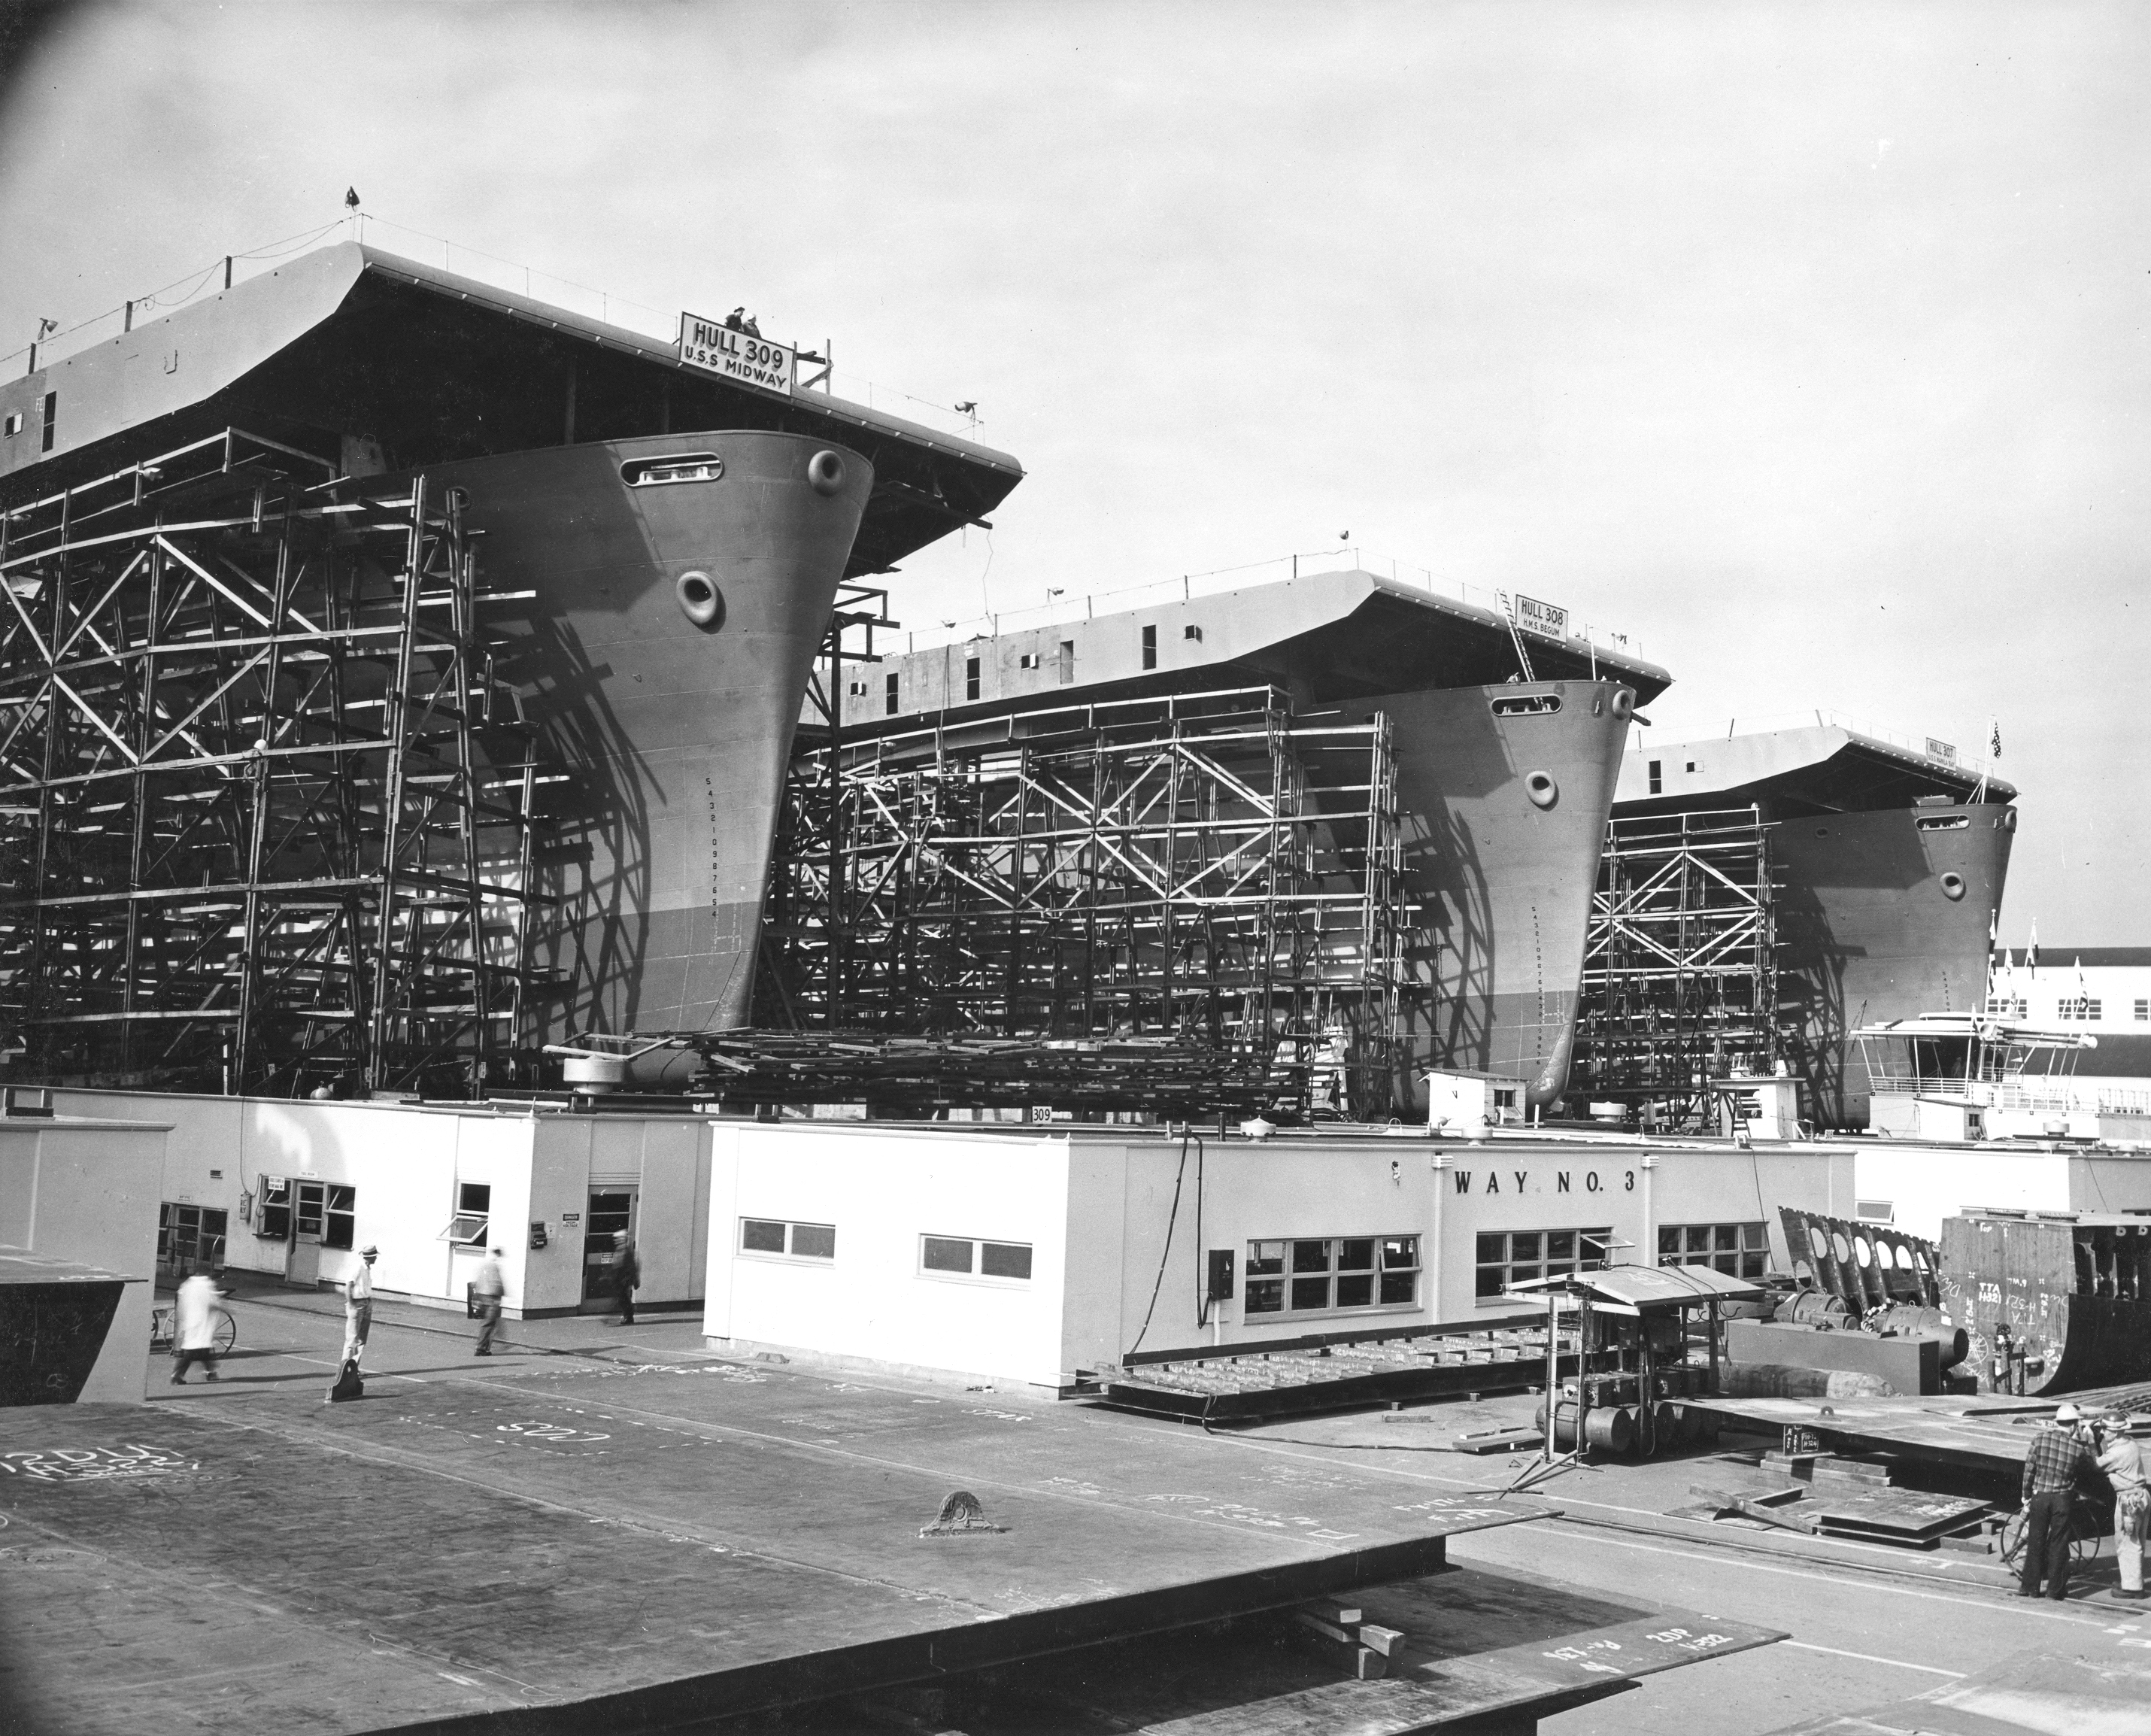 Three Casablanca-class escort carriers being readied for launch at the Kaiser Shipyards, Vancouver, Washington, United States, Jan 1943. 